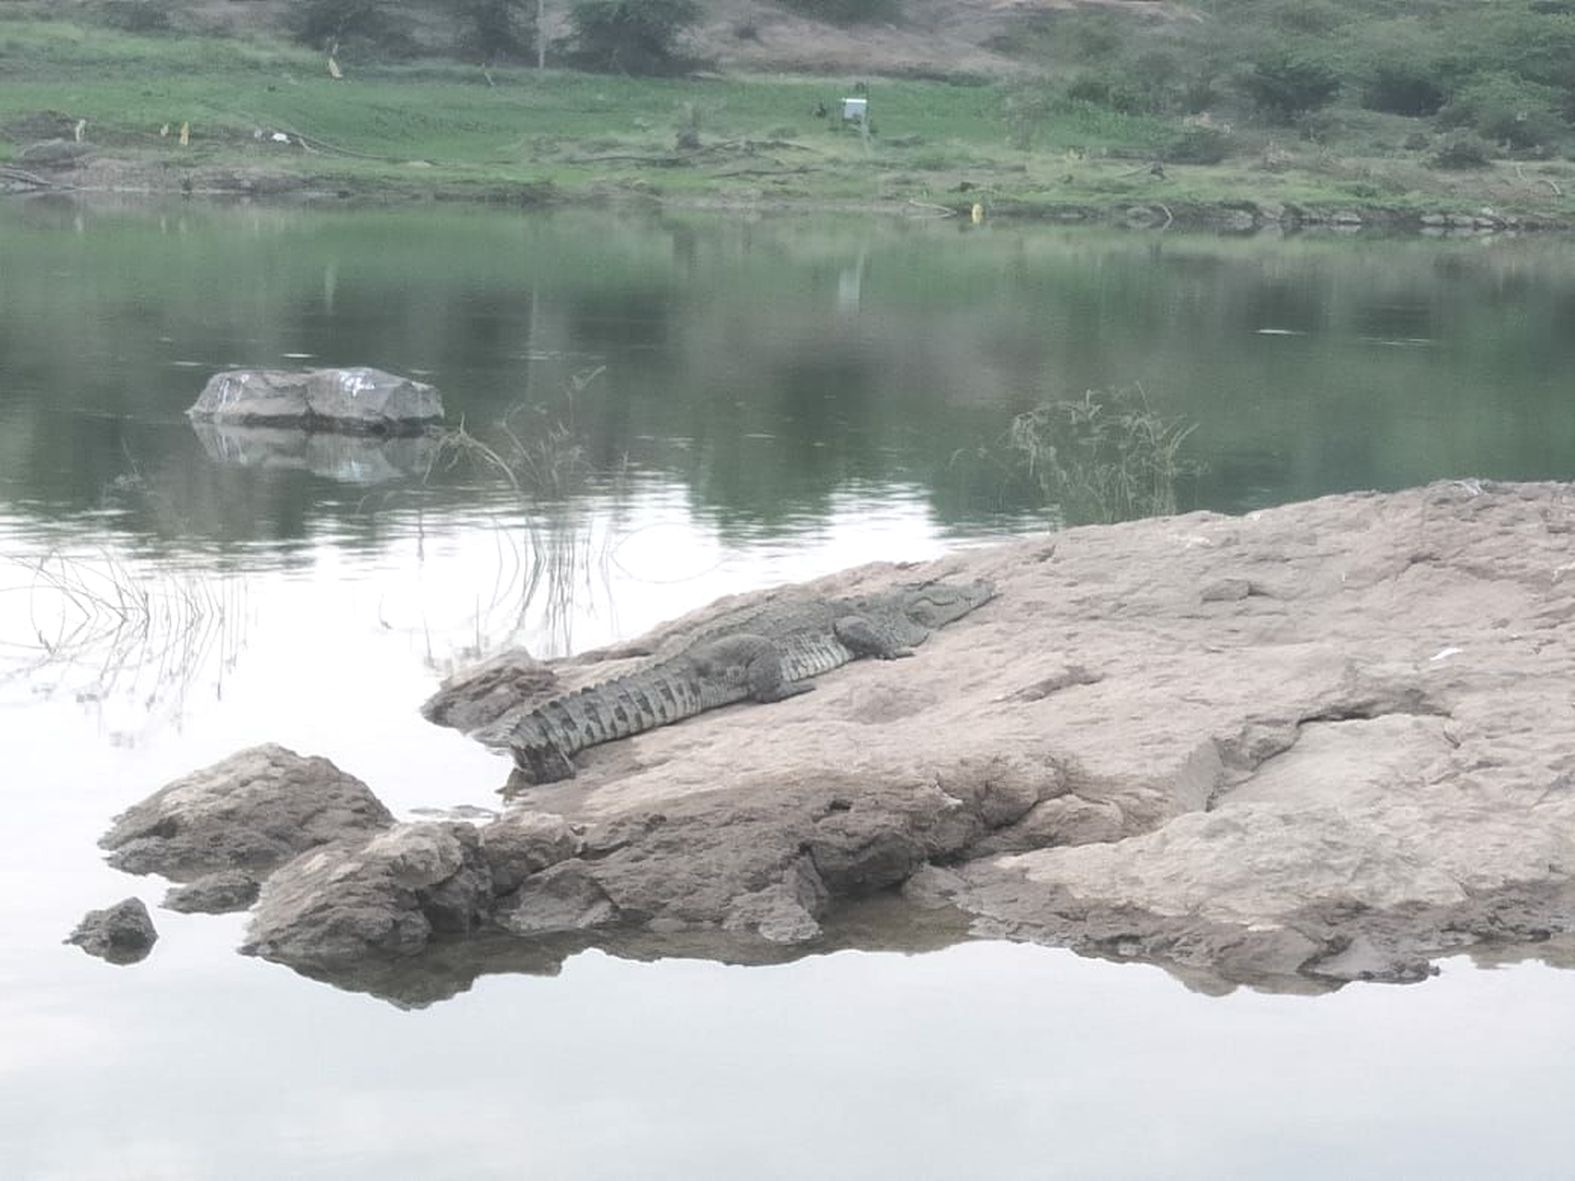 Crocodile showing on the banks of river Veda